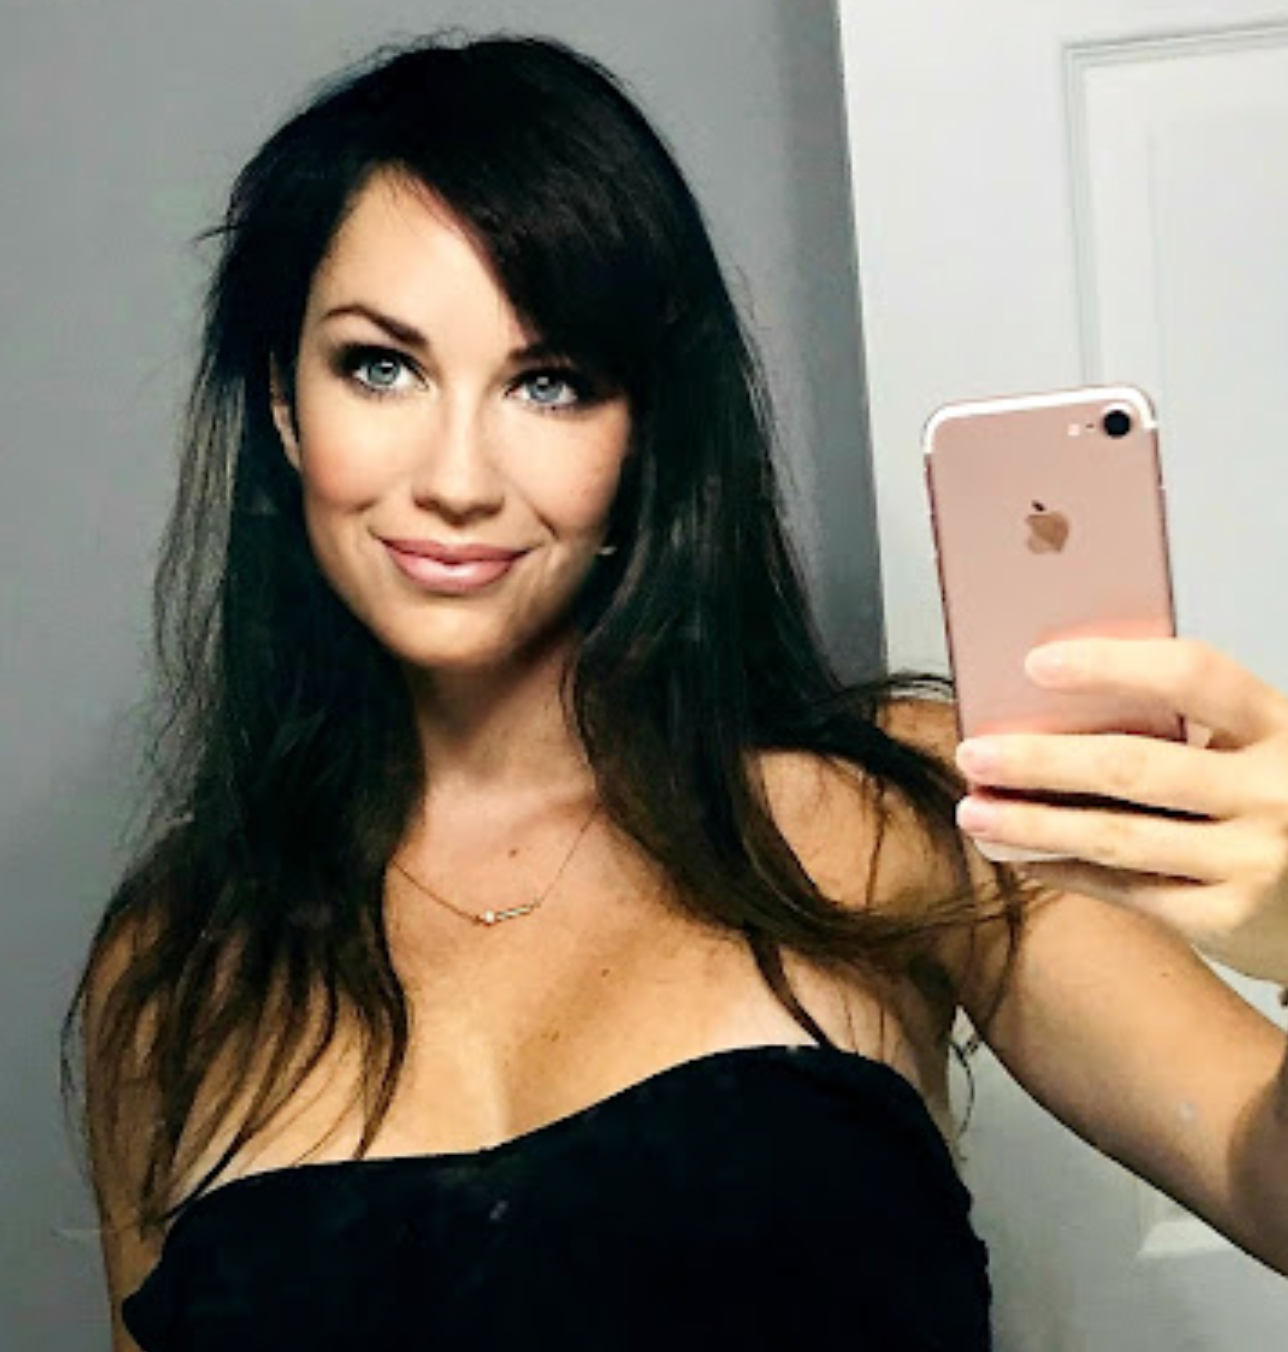 OnlyFans Model Claims She Can’t Get a Normal Job Because She’s ‘So Hot’ (You Be the Judge)